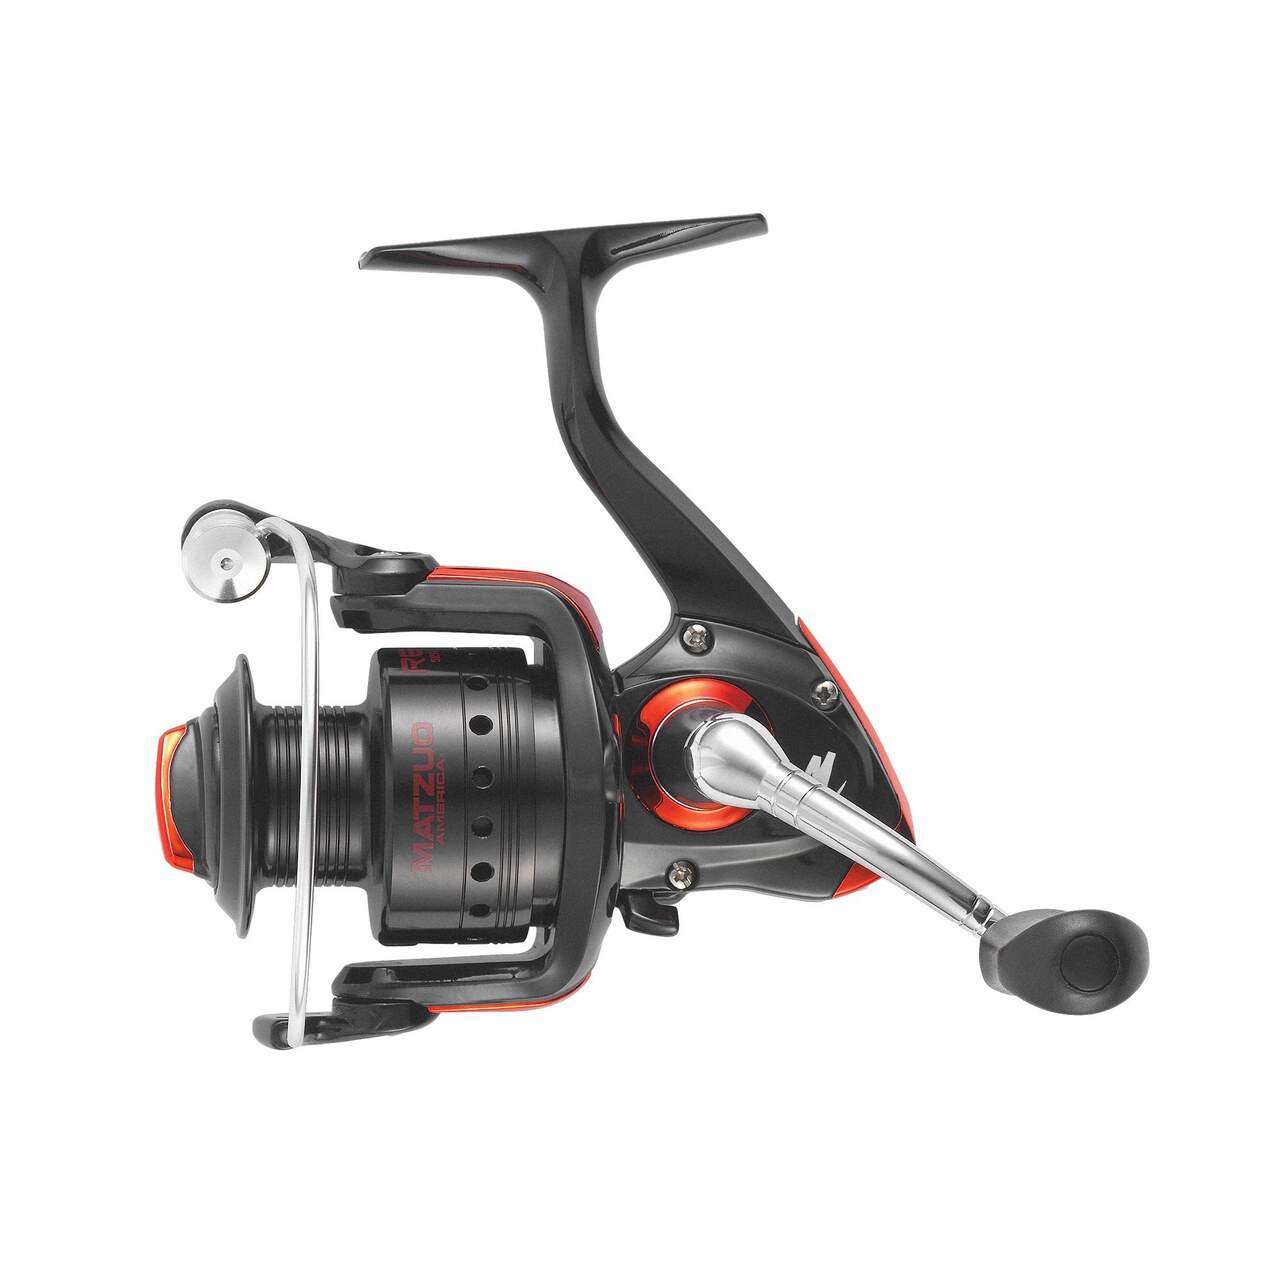 https://media-www.canadiantire.ca/product/playing/fishing/fishing-equipment/0775386/matzuo-spinning-reel-red-size-25-73bc7c65-effd-479c-b4d4-3b8d59e0ce59-jpgrendition.jpg?imdensity=1&imwidth=640&impolicy=mZoom